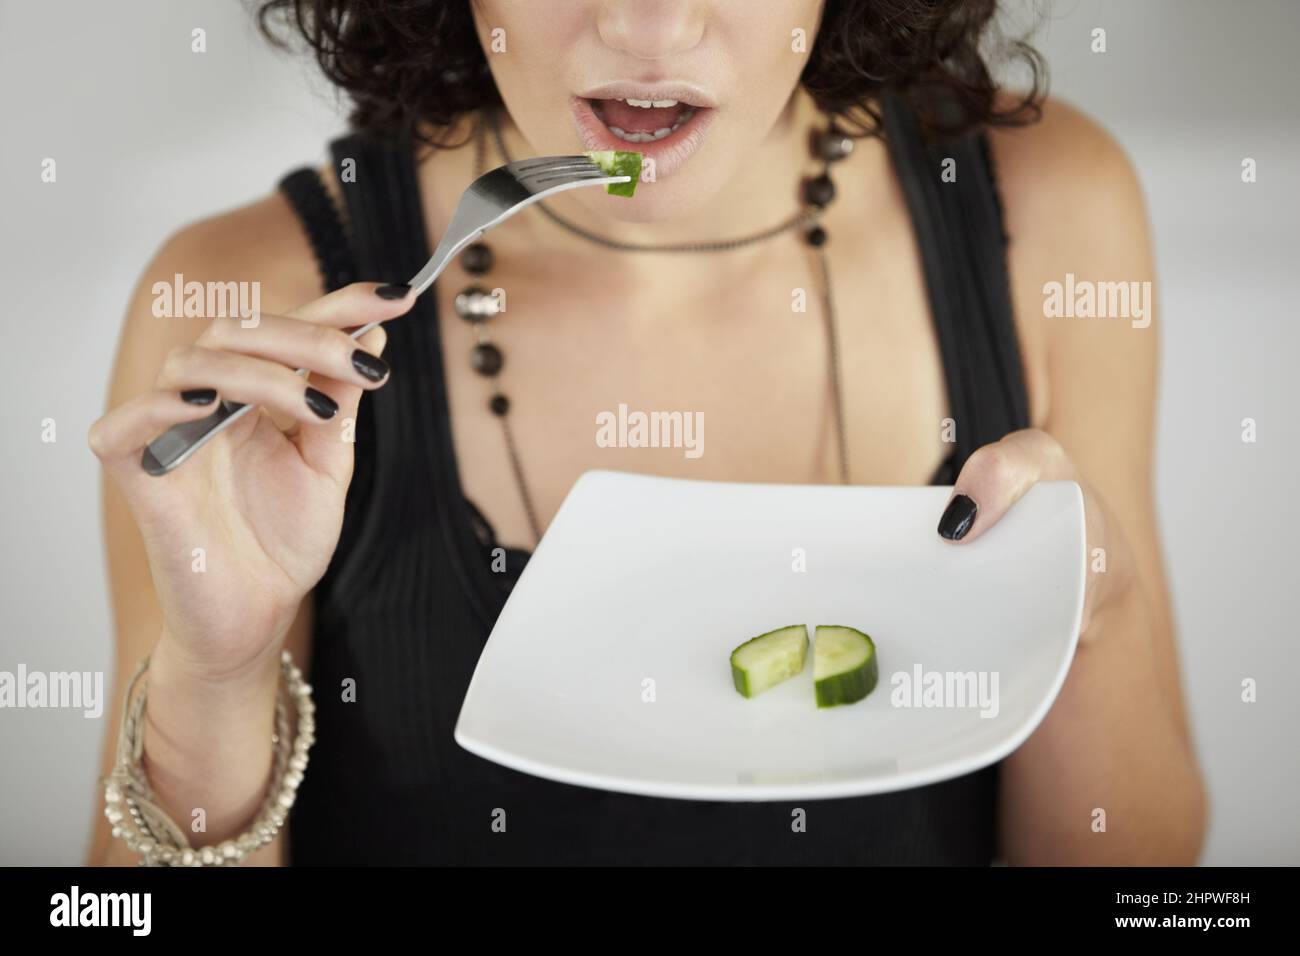 The pressures of Hollywood. Shot of a young woman suffering from anorexia. Stock Photo